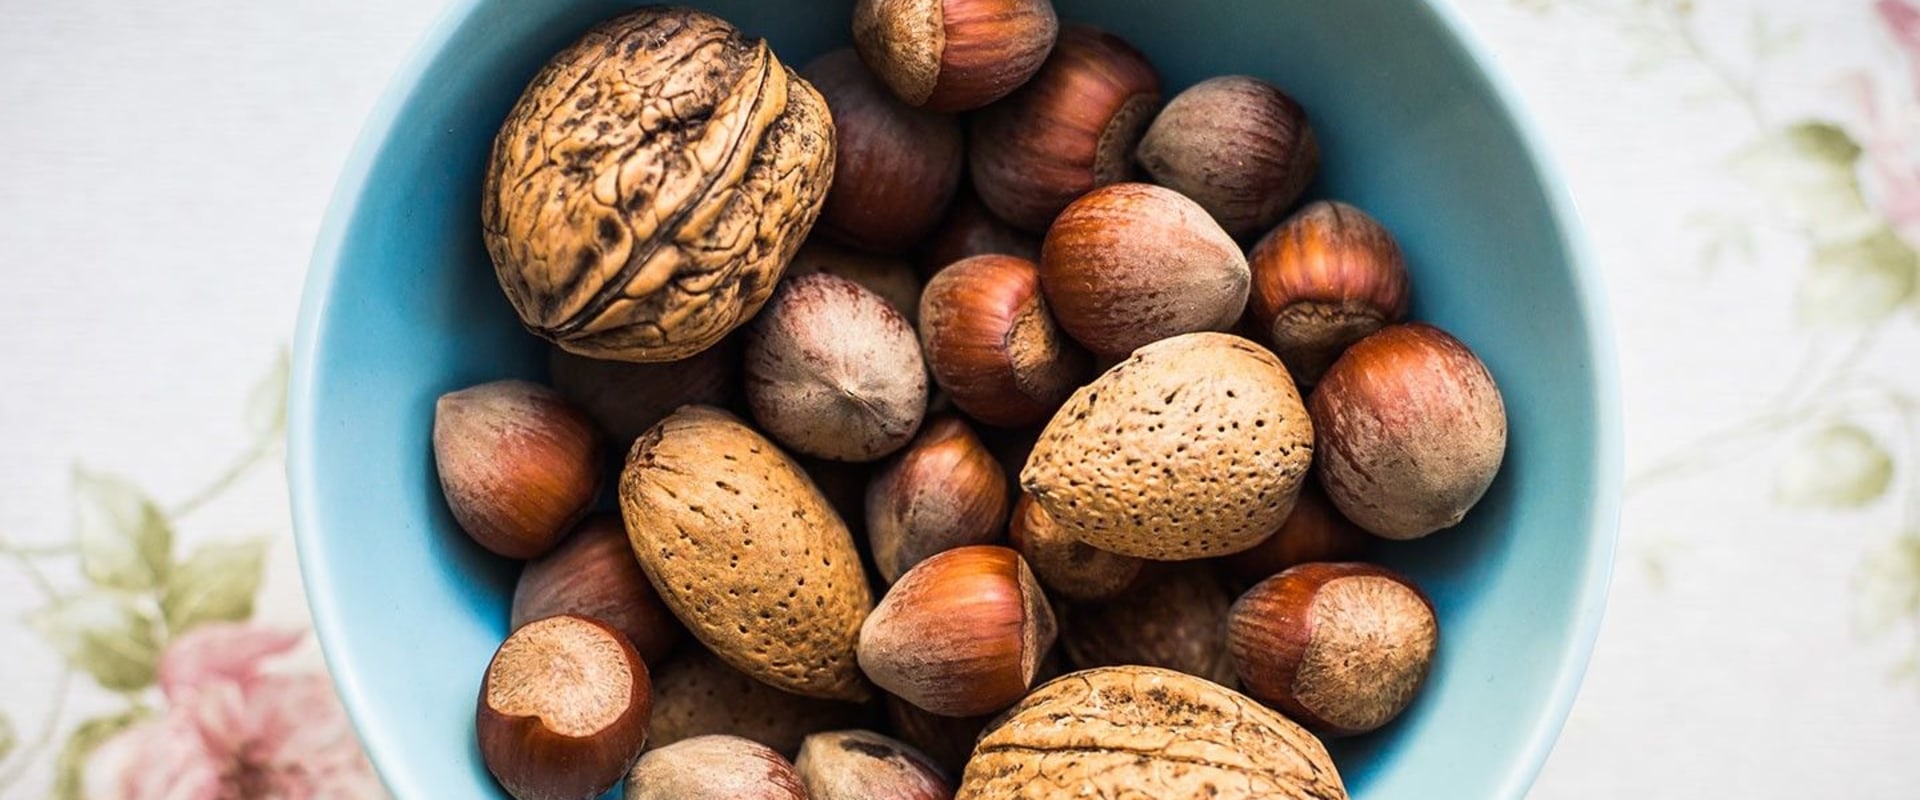 Is it ok to eat macadamia nuts everyday?